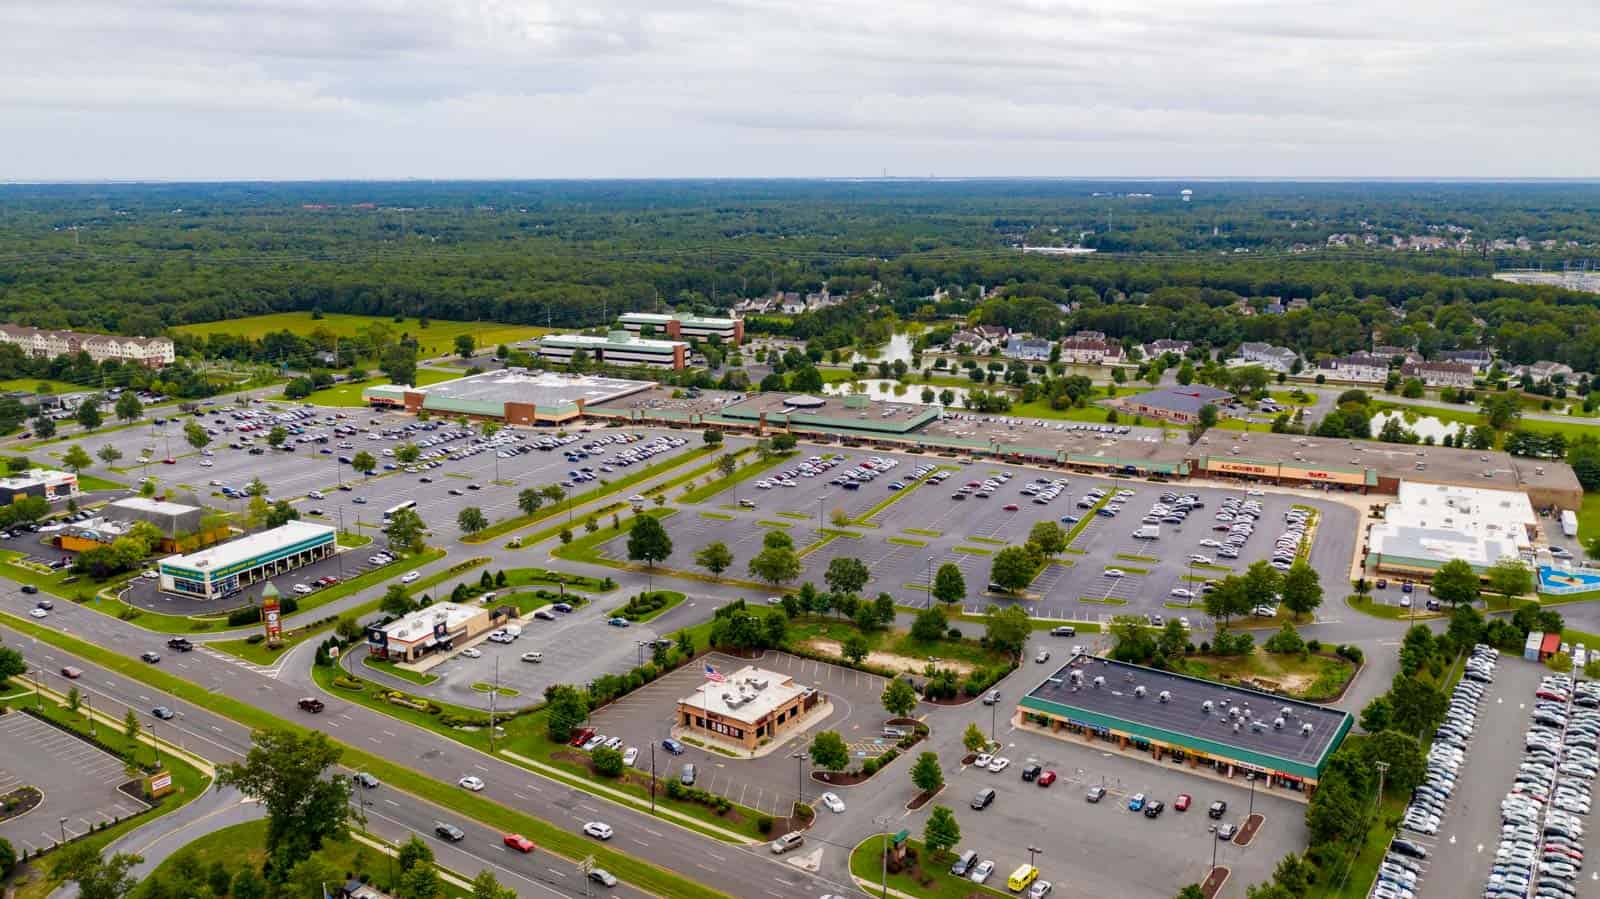 Egg Harbor Township Commercial Real Estate Drone Photography